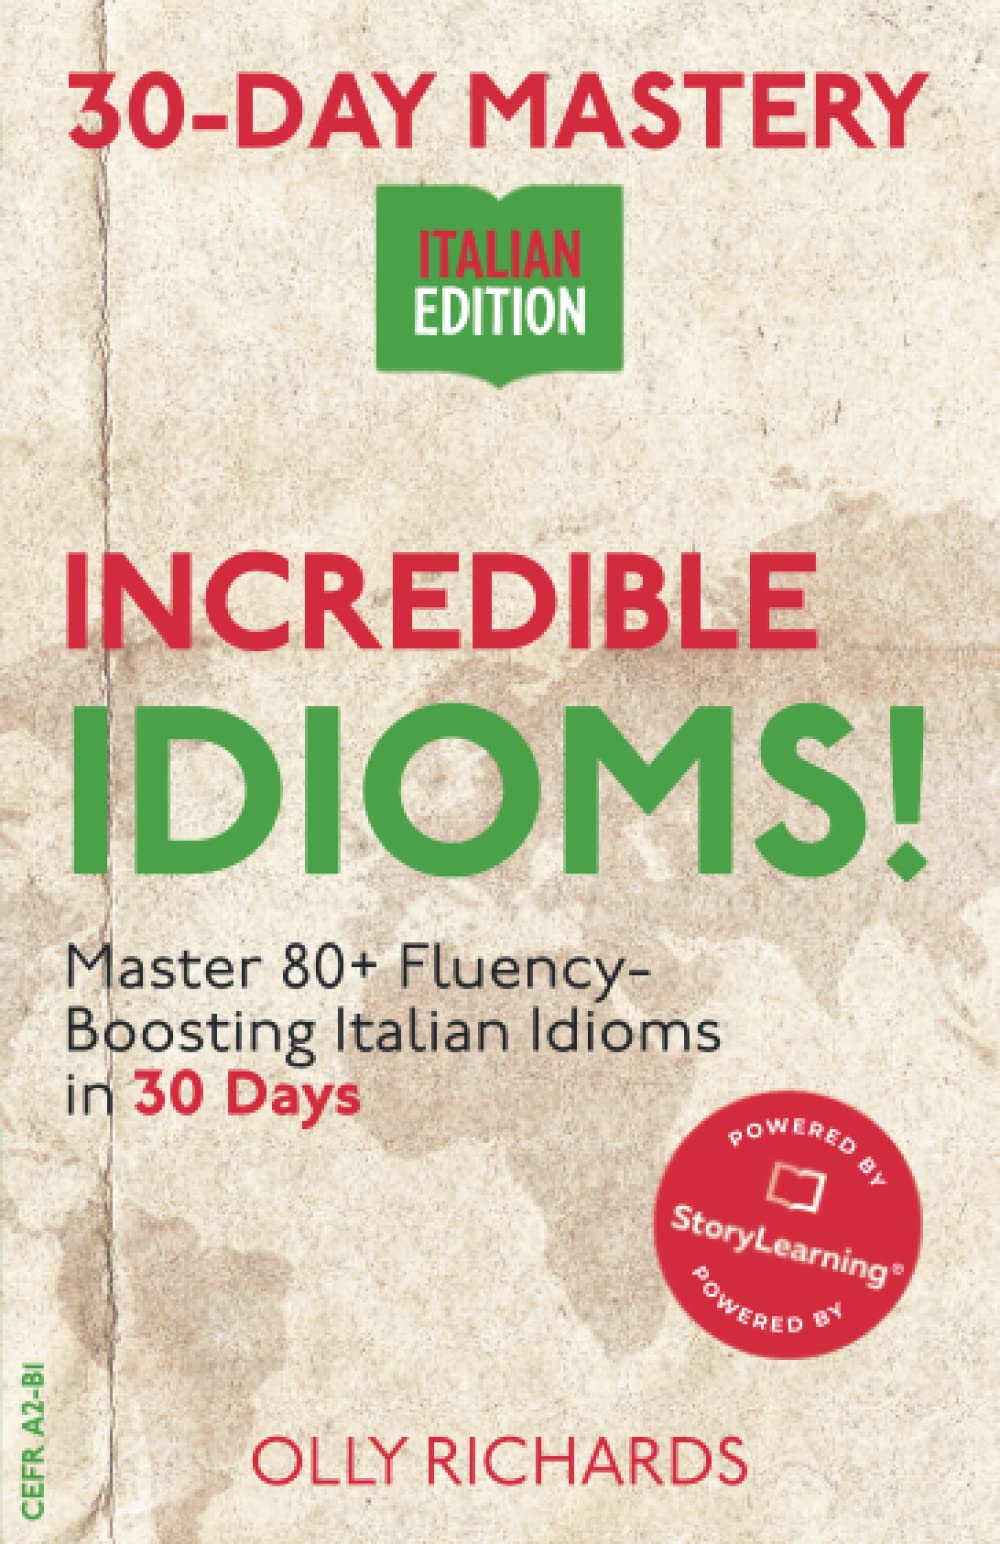 30-Day Mastery: Incredible Idioms!